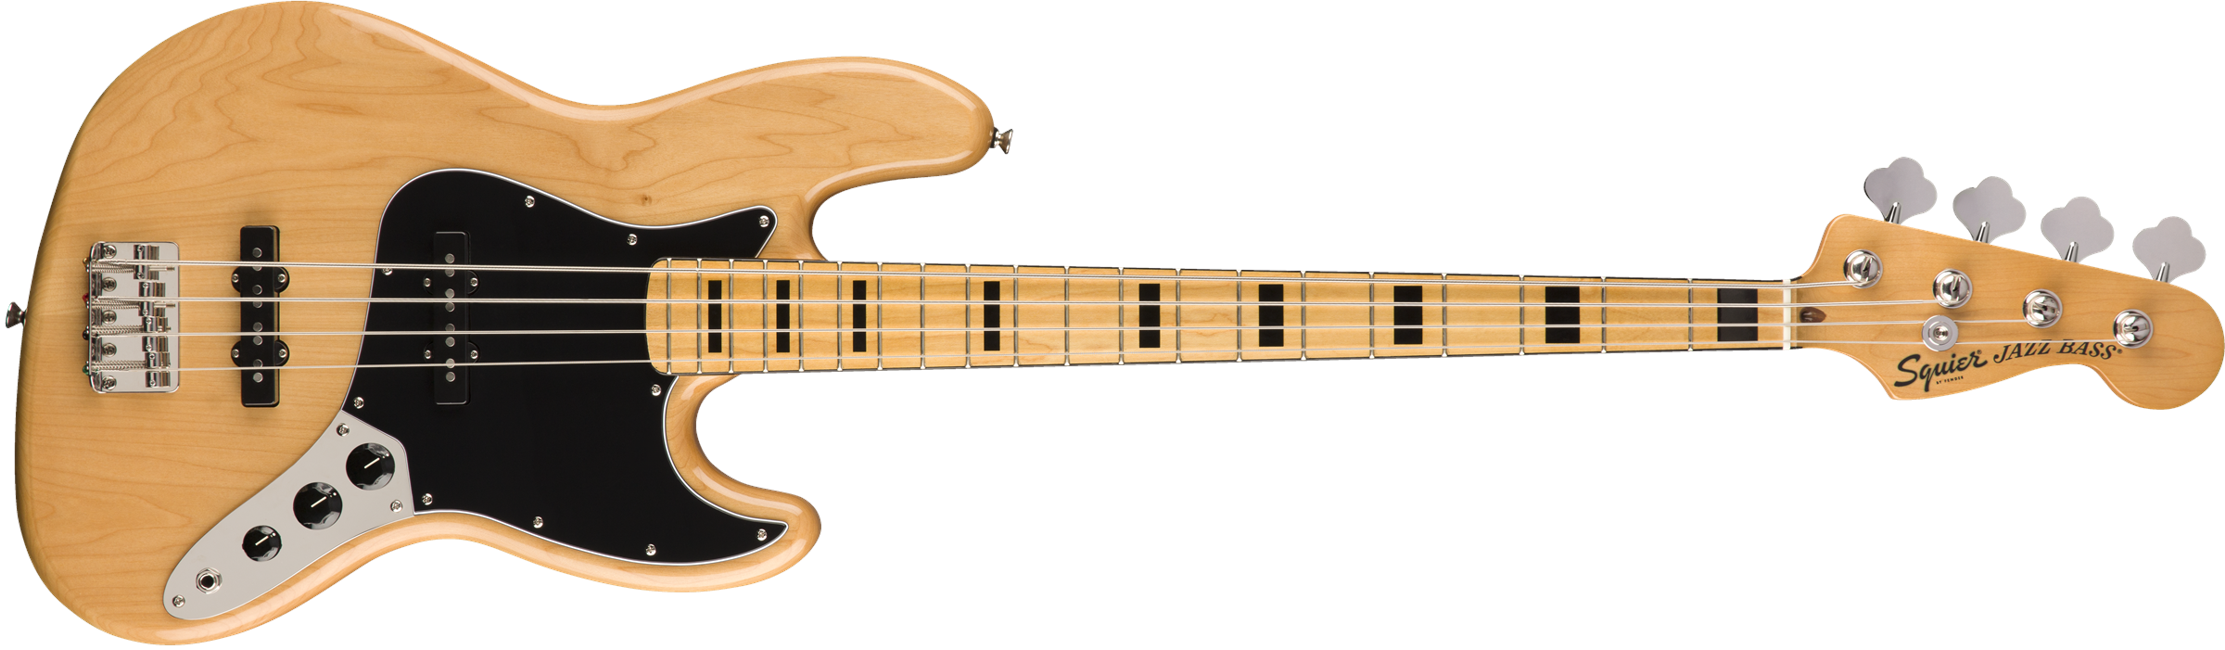 Squier By Fender - Classic Vibe 70's Jazz Bass - Elektrisk Bas (Natural)